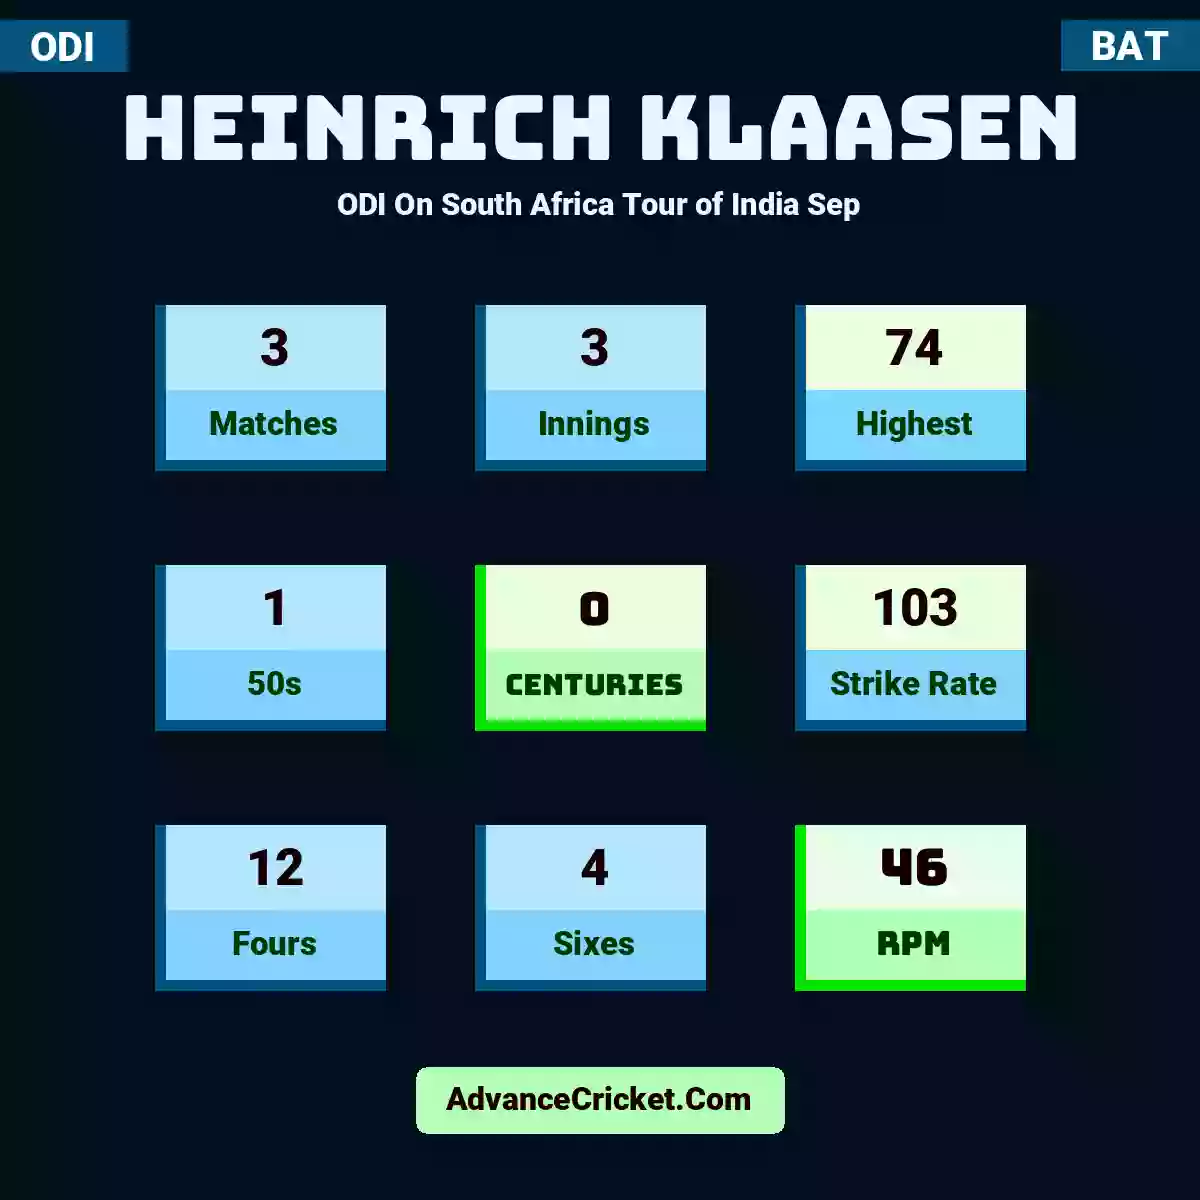 Heinrich Klaasen ODI  On South Africa Tour of India Sep, Heinrich Klaasen played 3 matches, scored 74 runs as highest, 1 half-centuries, and 0 centuries, with a strike rate of 103. H.Klaasen hit 12 fours and 4 sixes, with an RPM of 46.